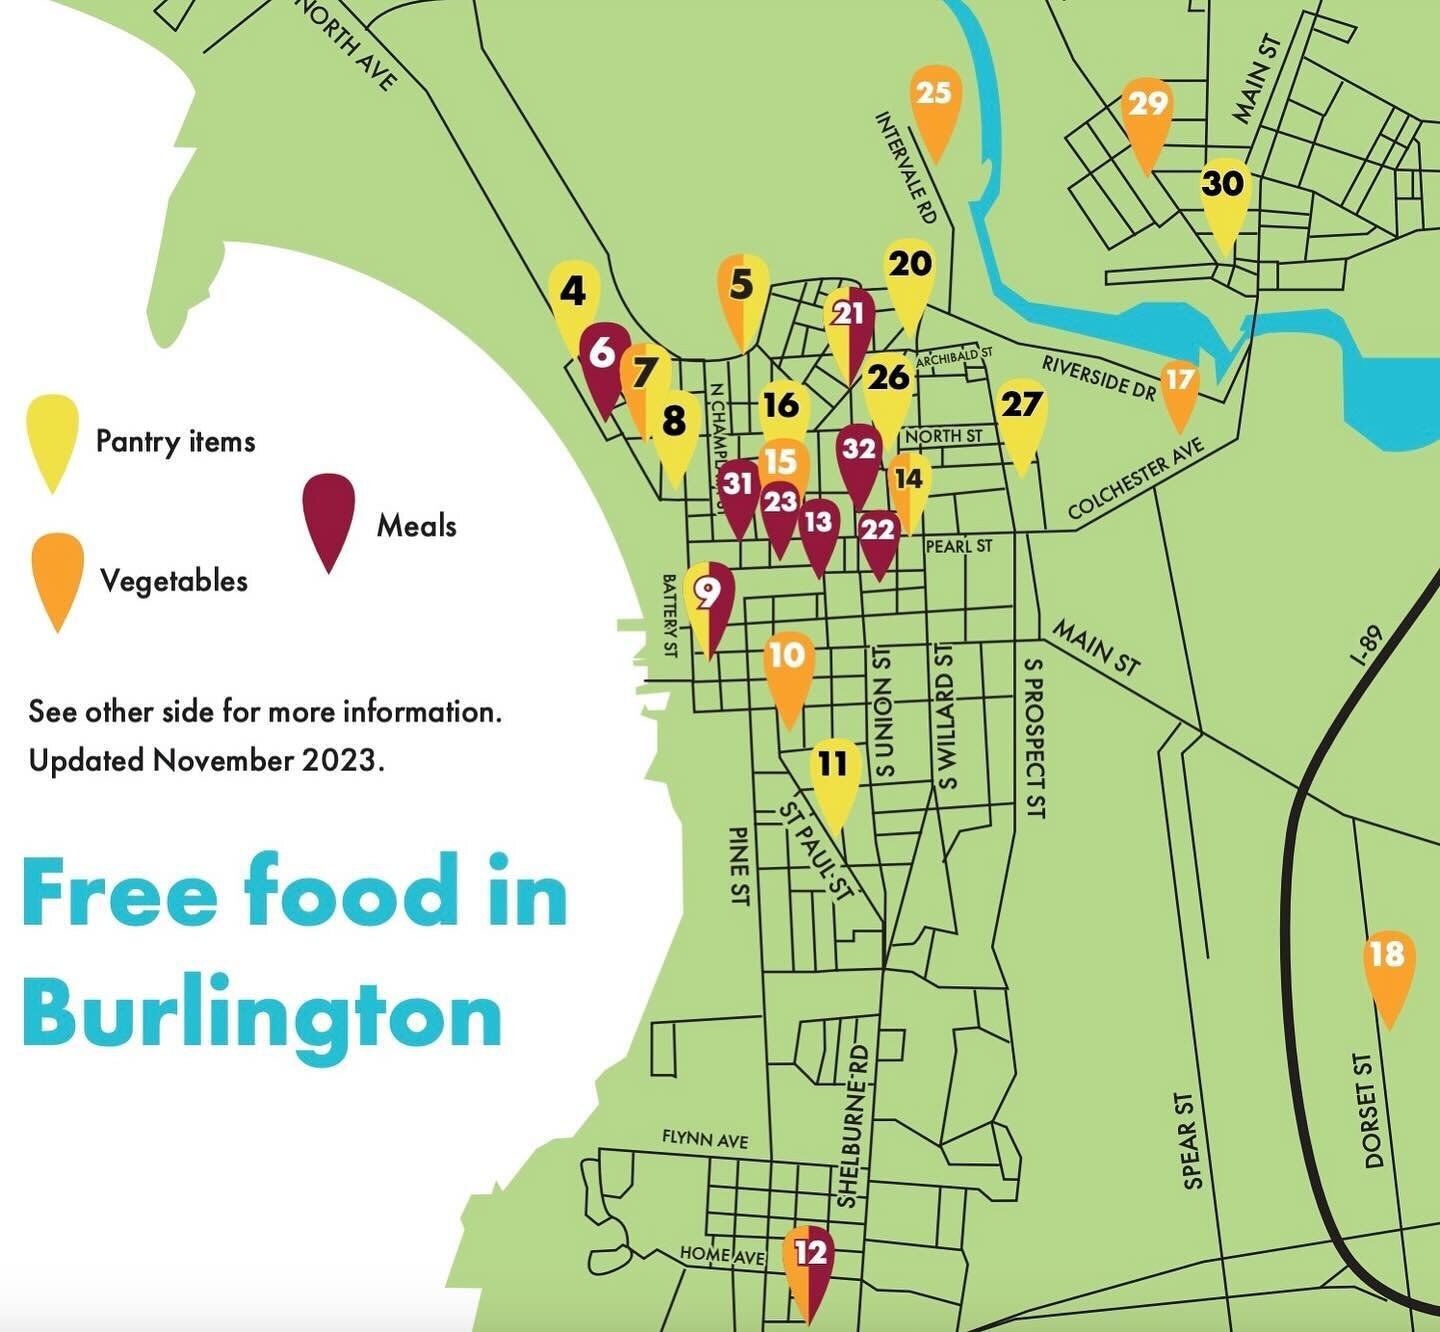 We believe that everyone should have access to fresh, local produce! 🍅🥬🫑 Check out the map of free food in Burlington at tinyurl.com/FreeFoodBTV or download the printable version at tinyurl.com/FreeFoodPrintable